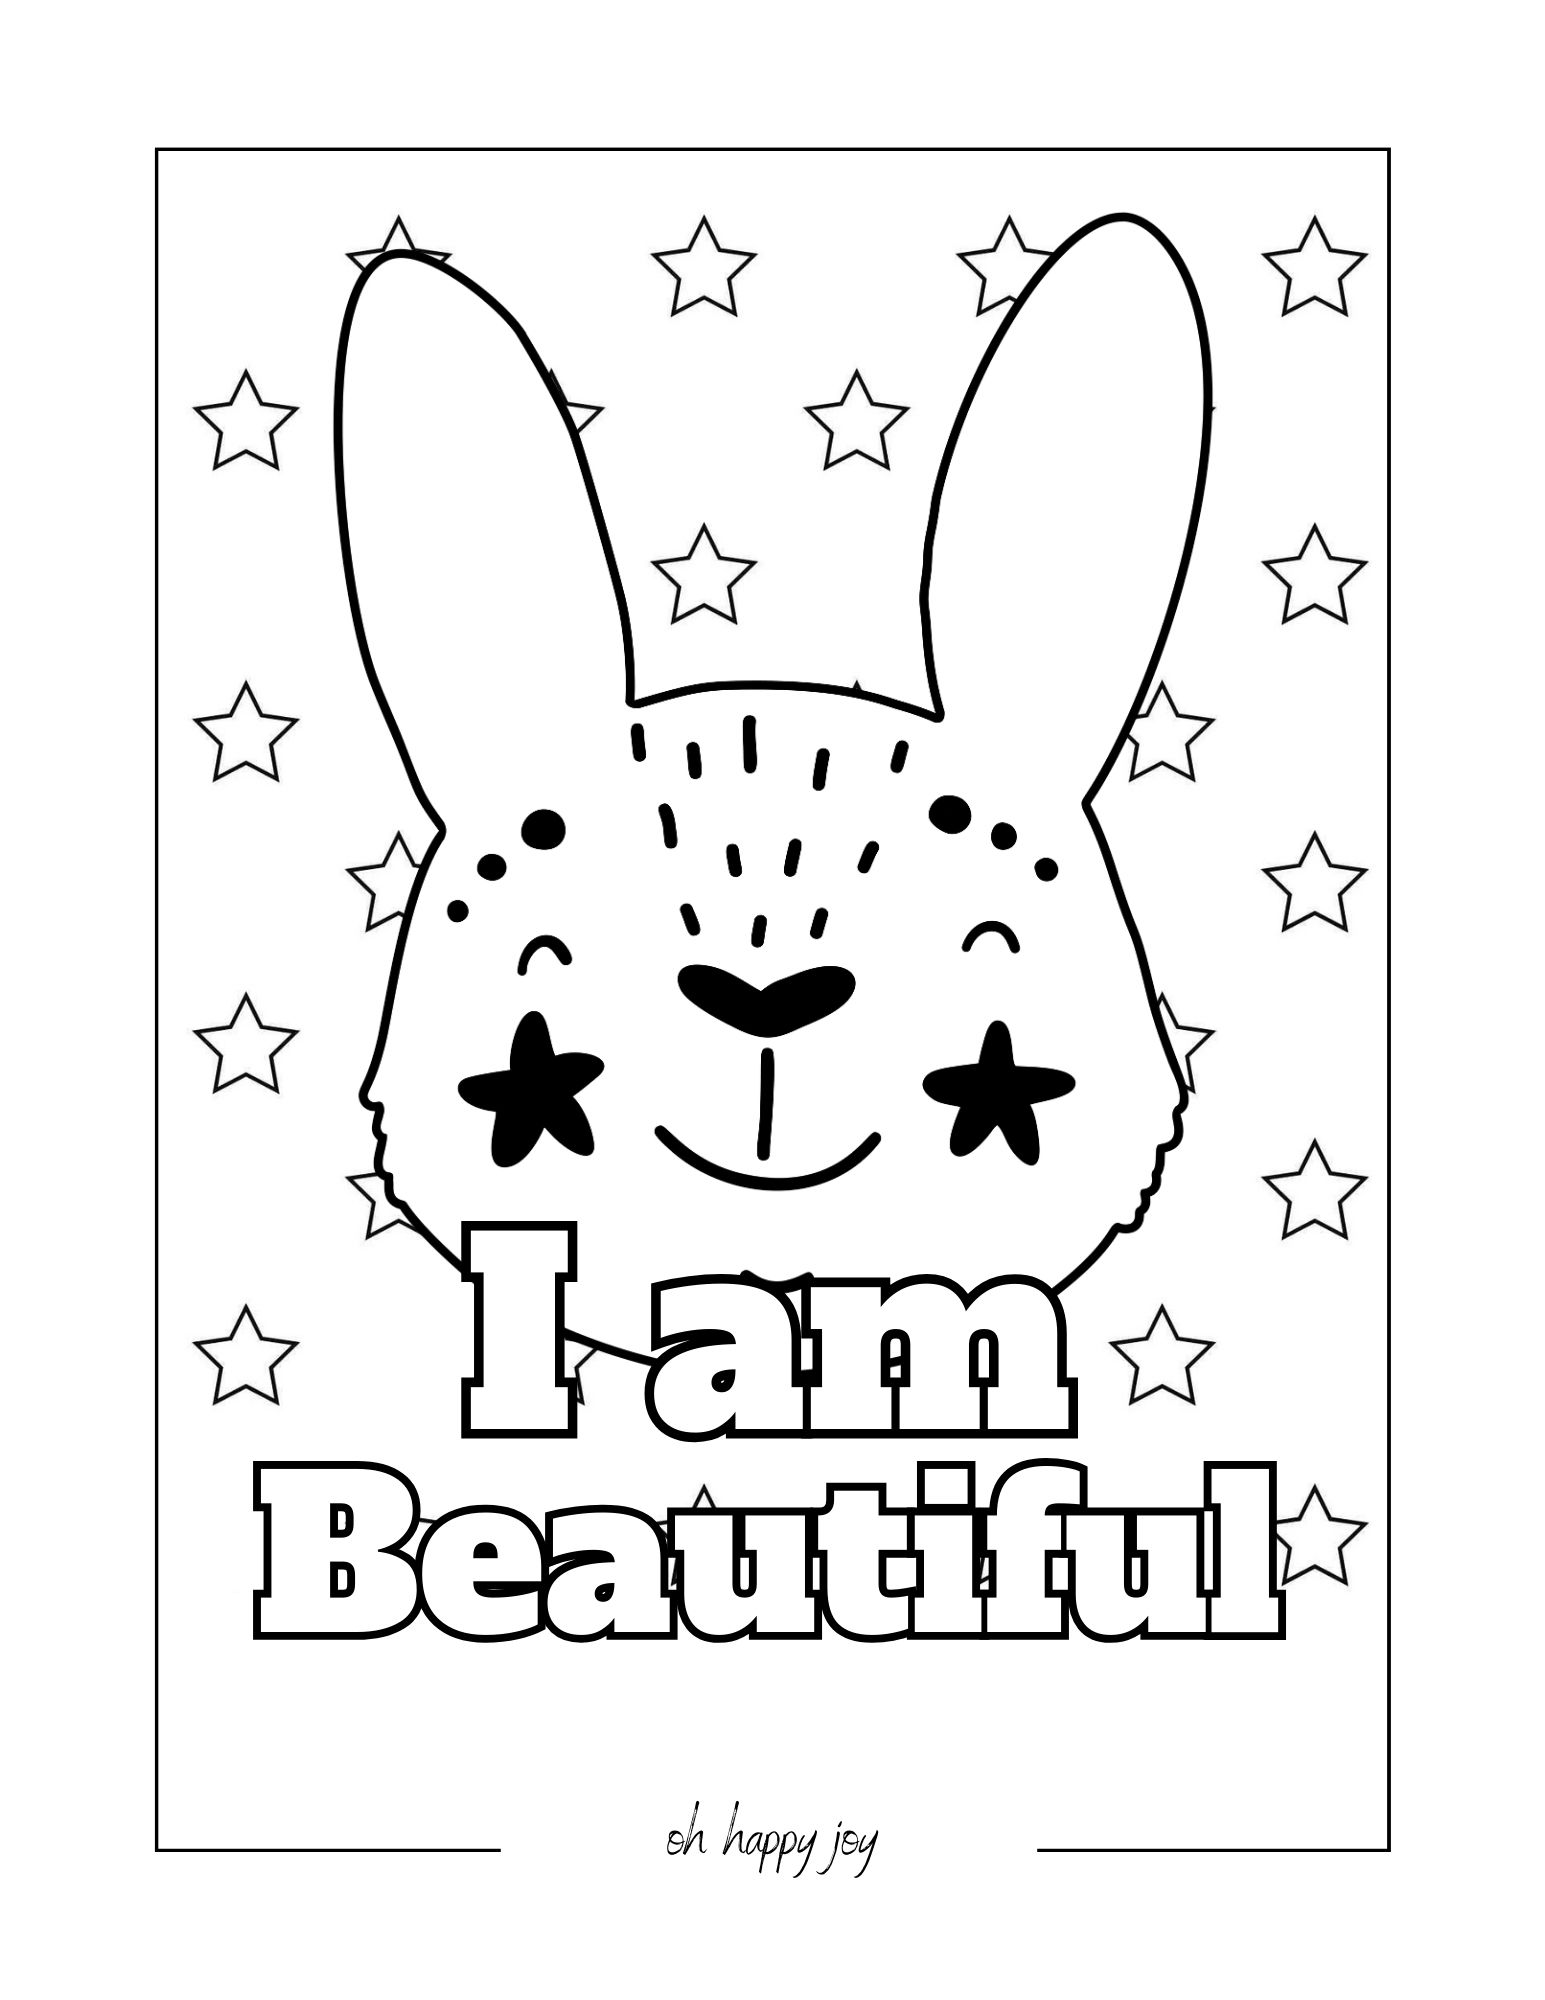 I am beautiful affirmation coloring page